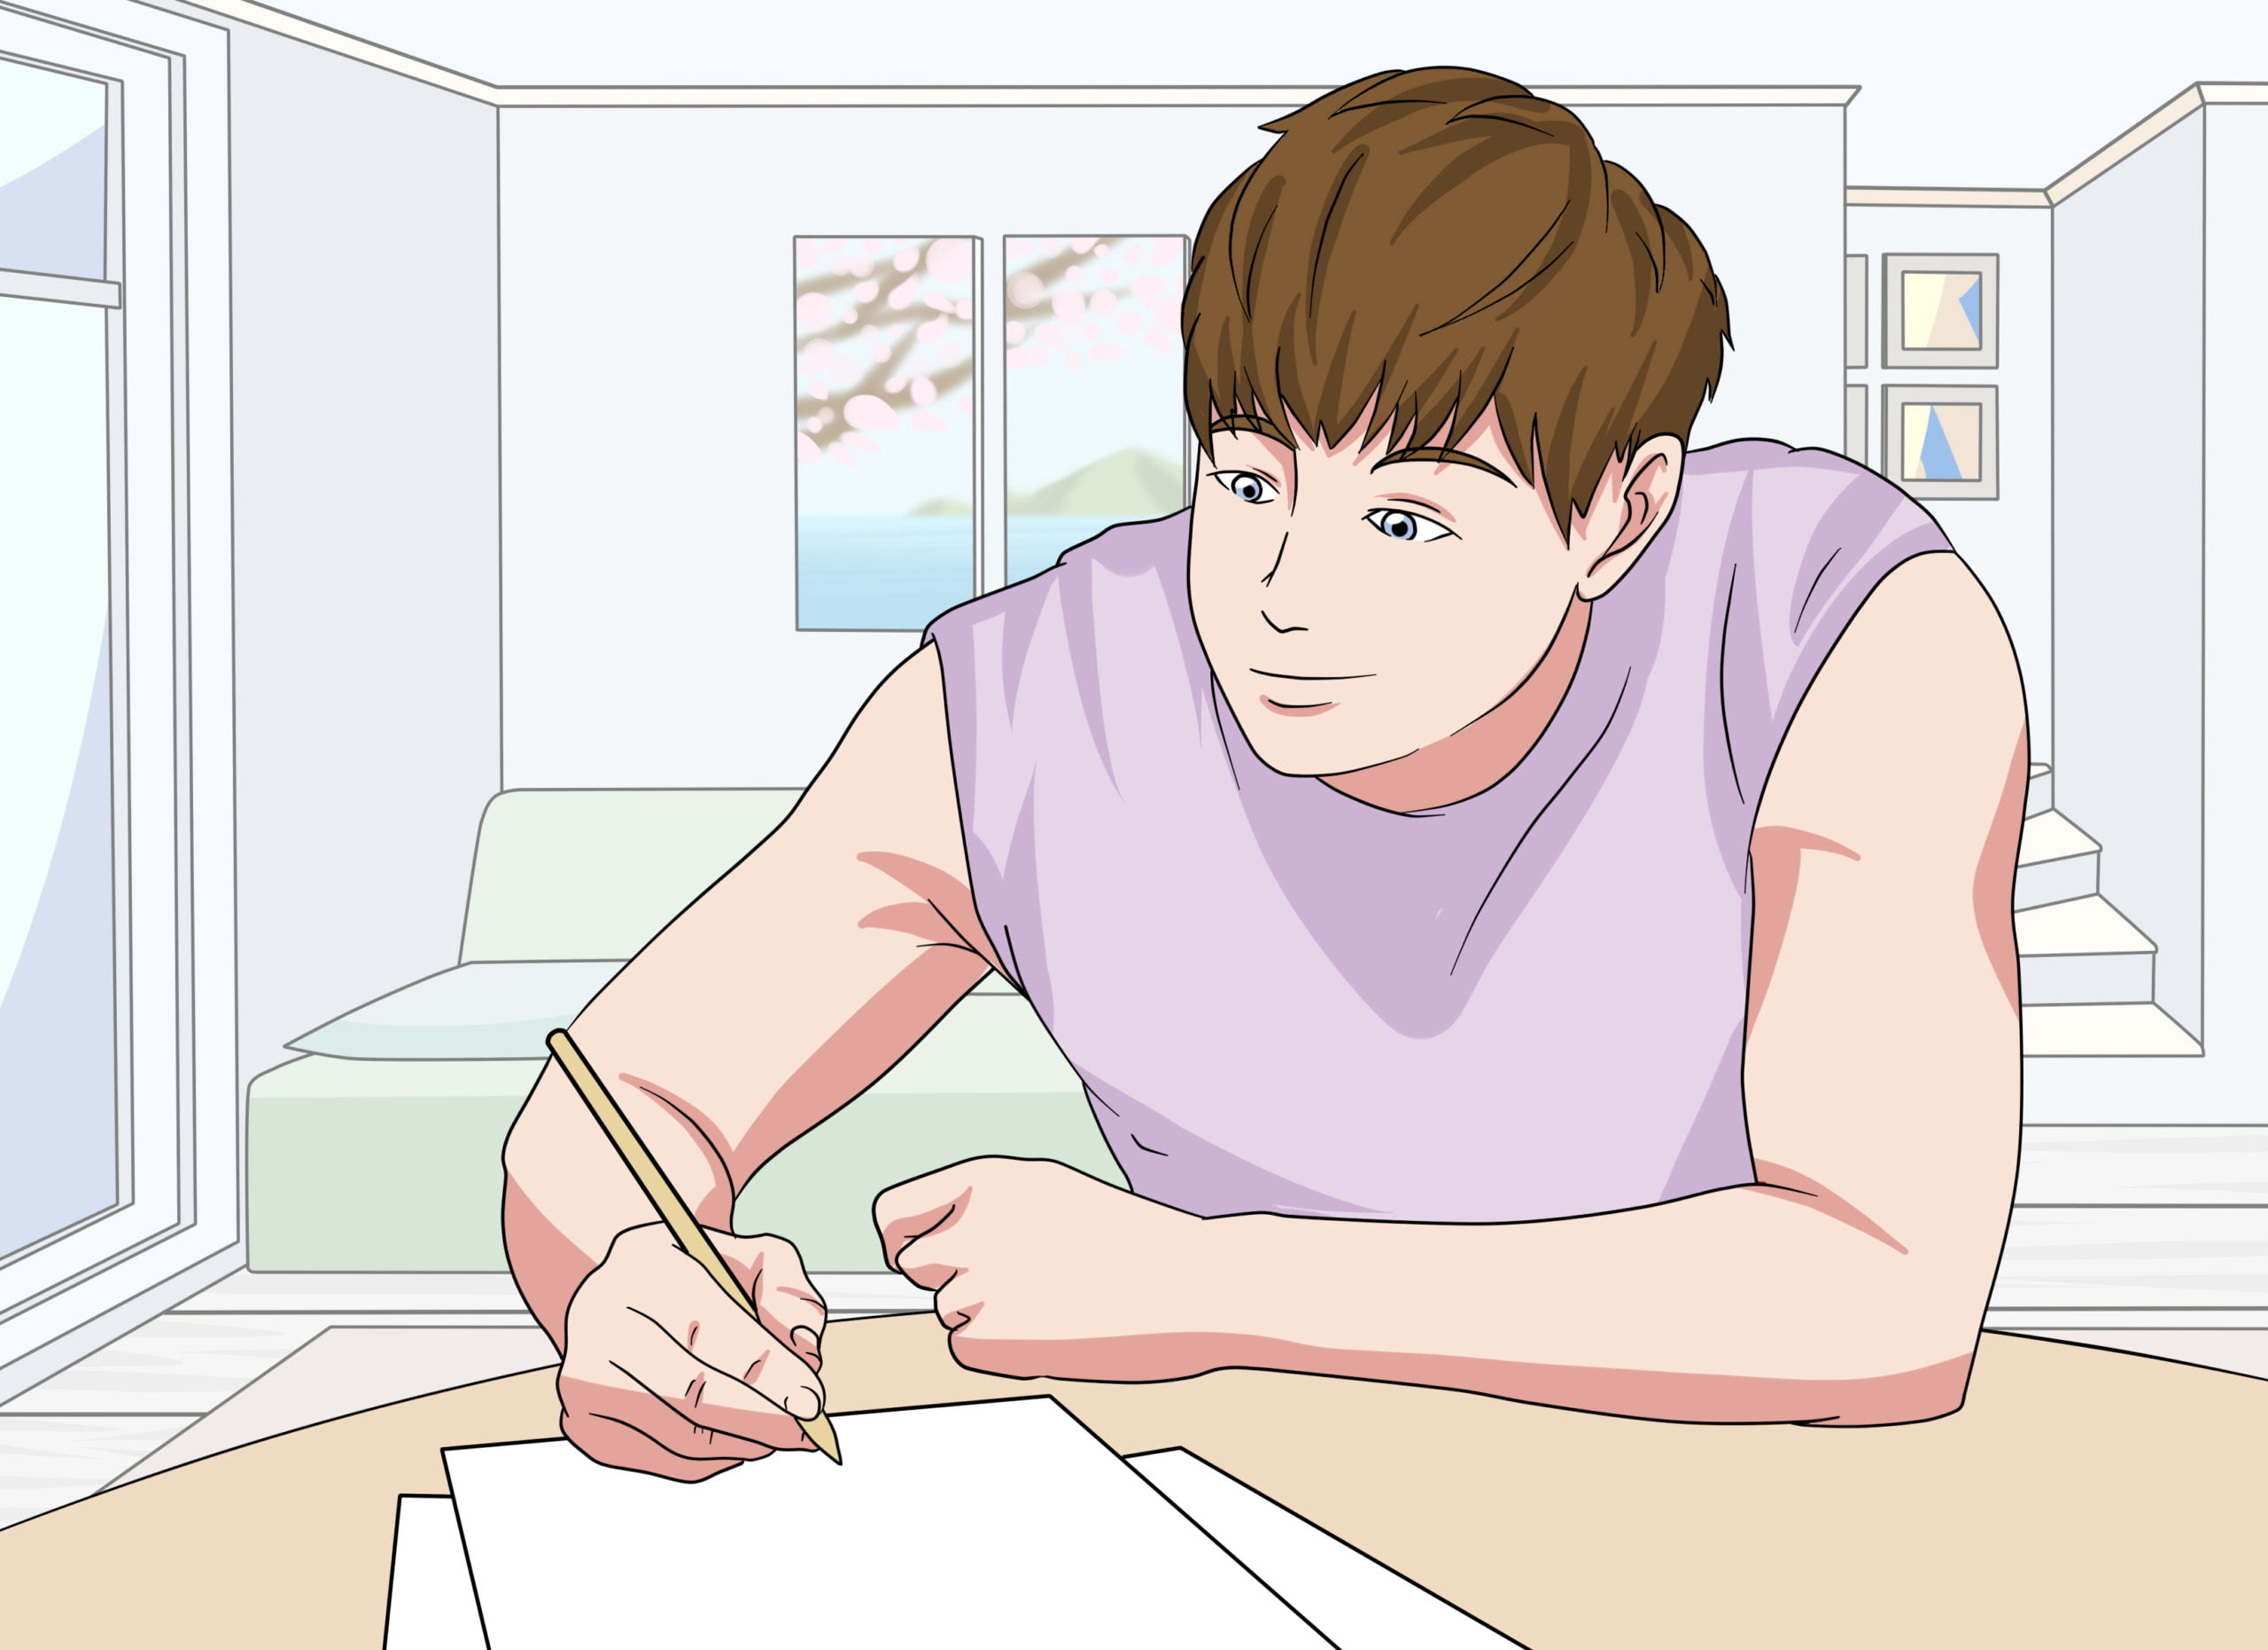 How to Draw an Anime Boy: 8 Steps (with Pictures) - wikiHow